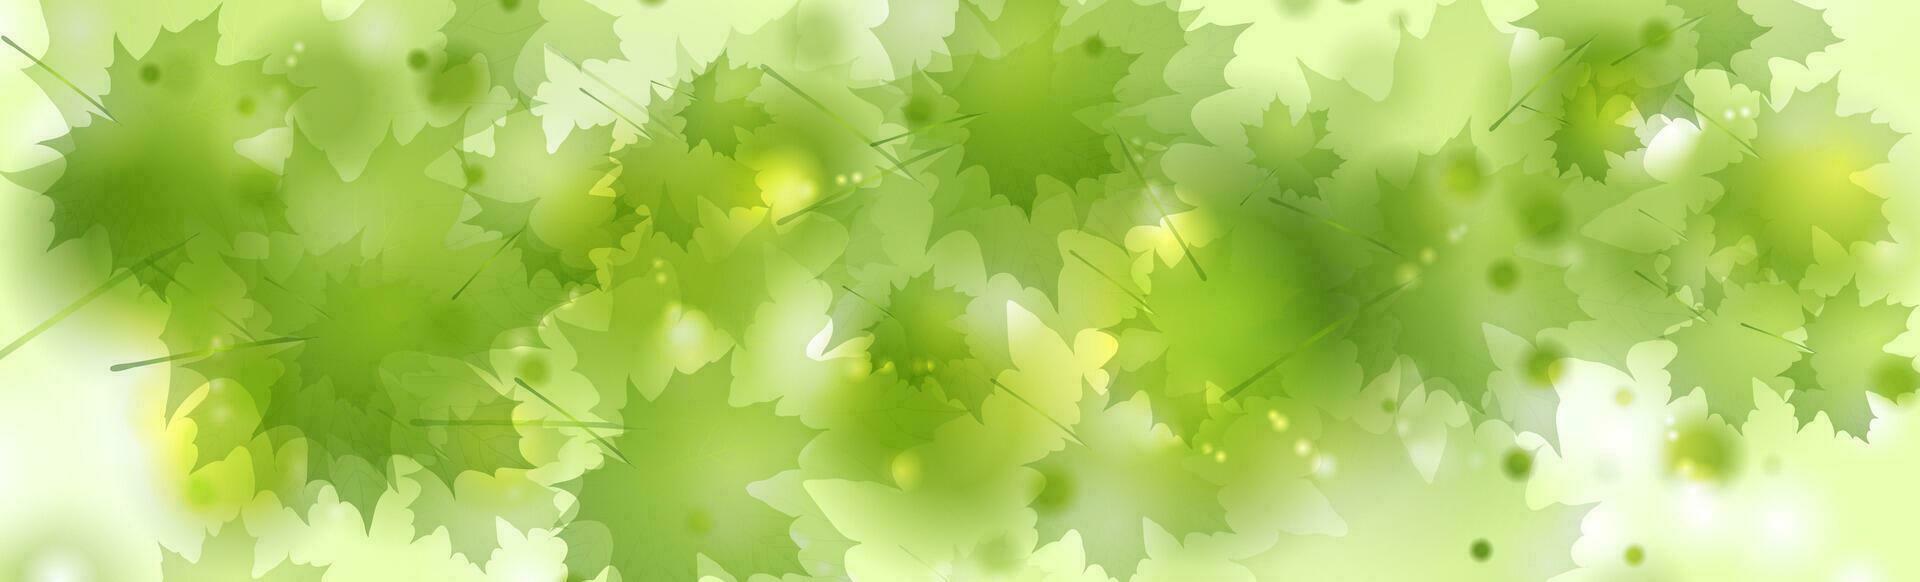 Abstract green leaves shiny summer background vector